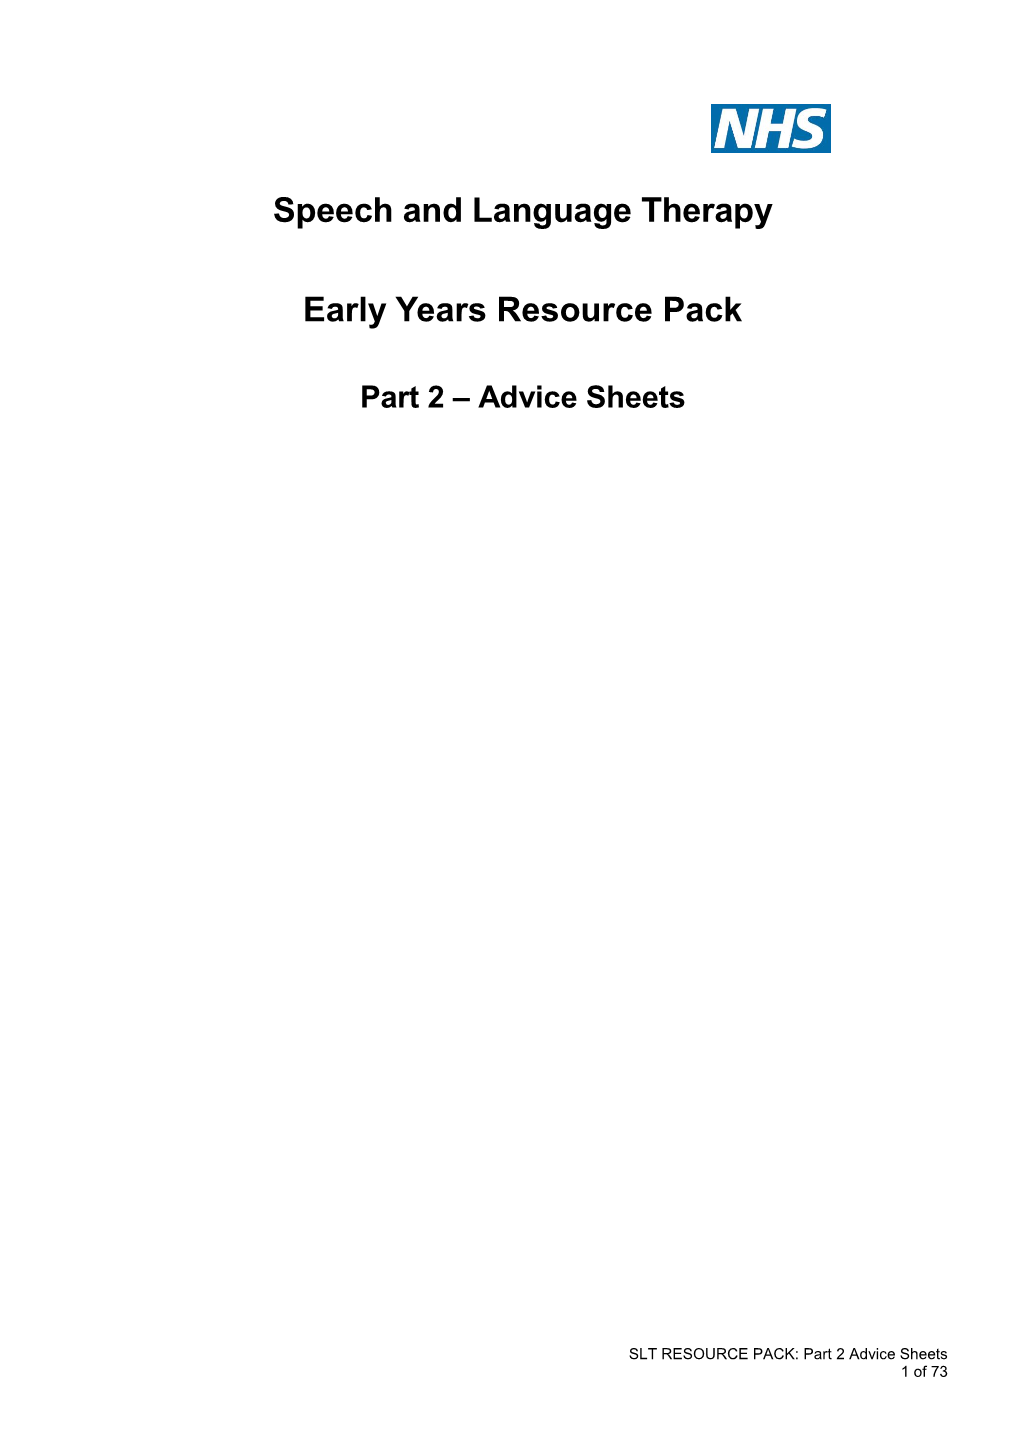 Speech & Language Therapy Resource Pack